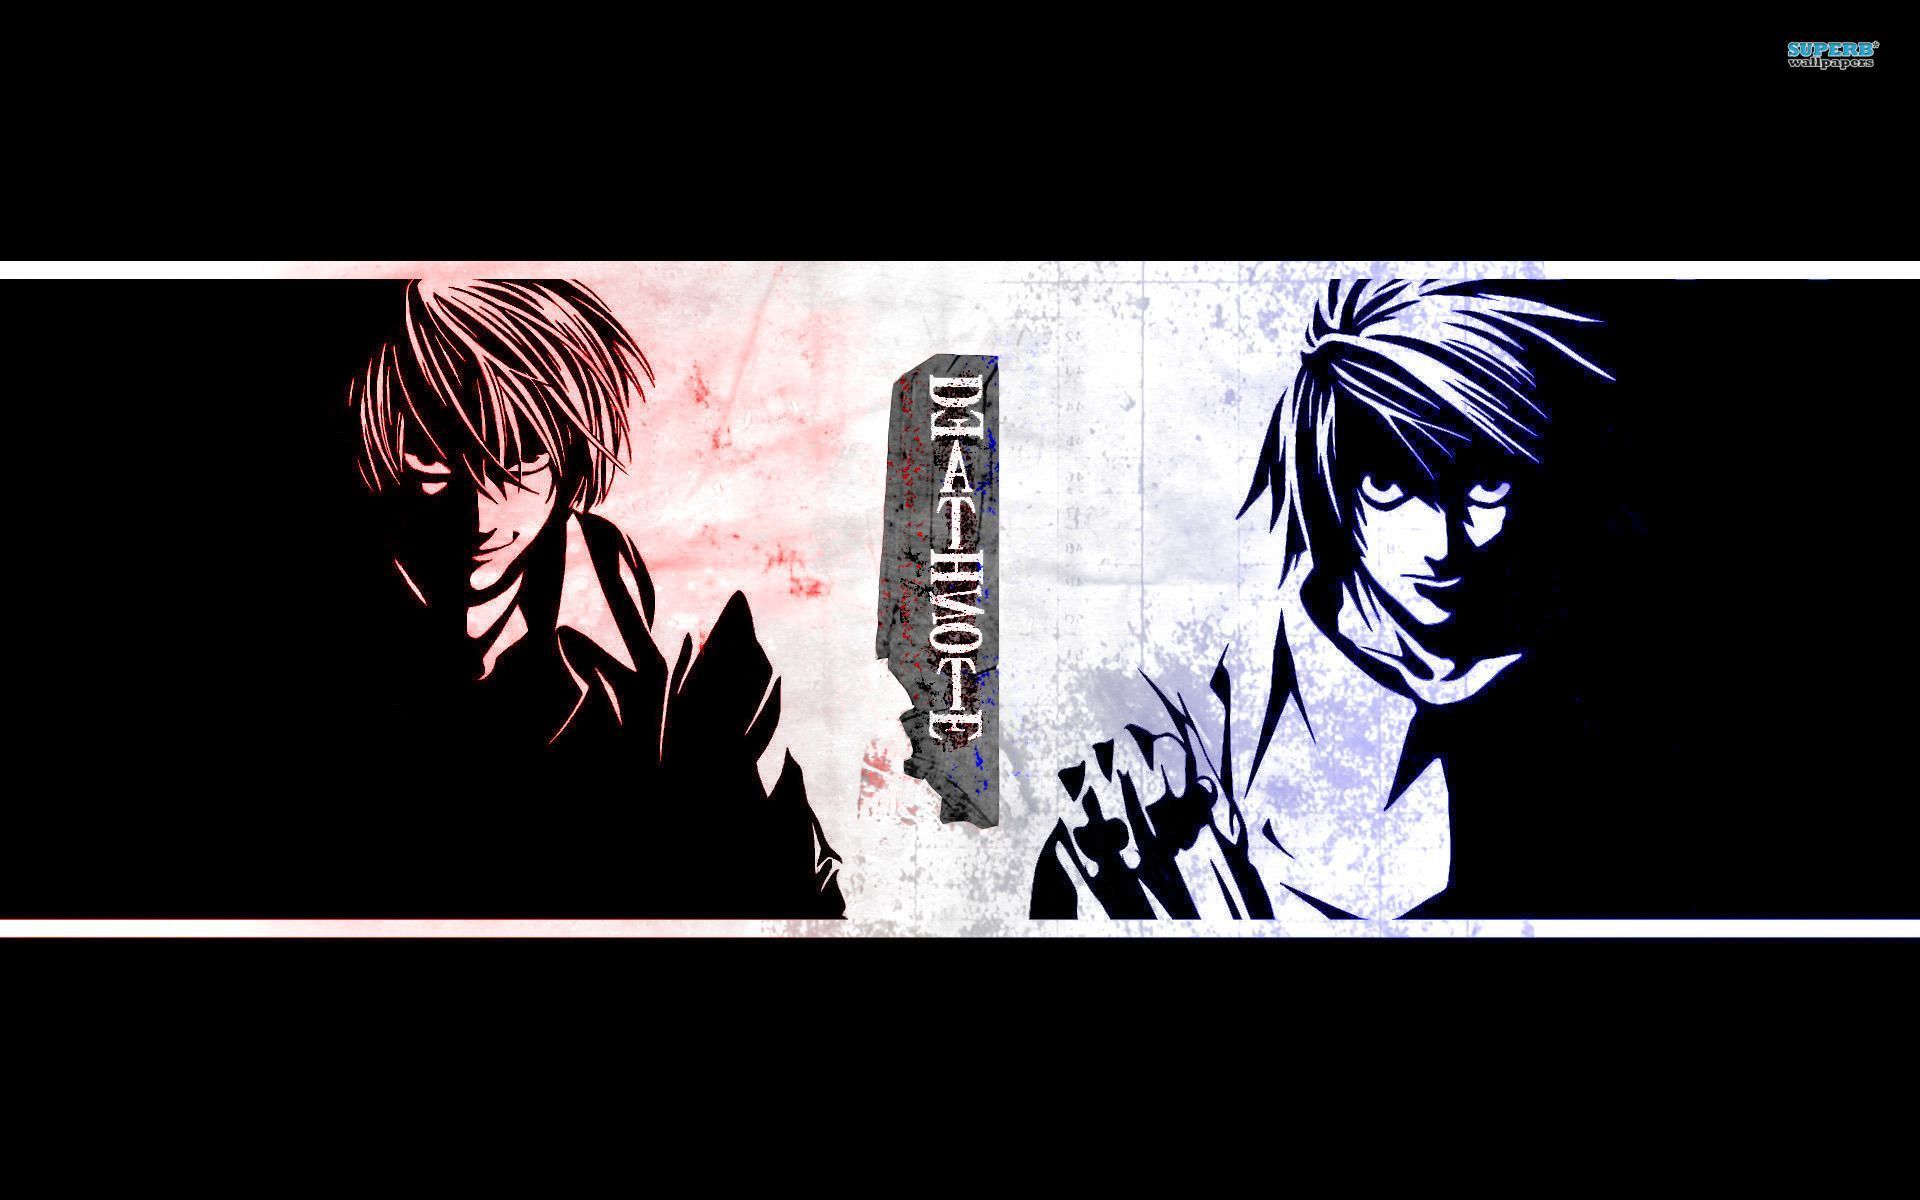 L - Death Note wallpaper - Anime wallpapers - #14180